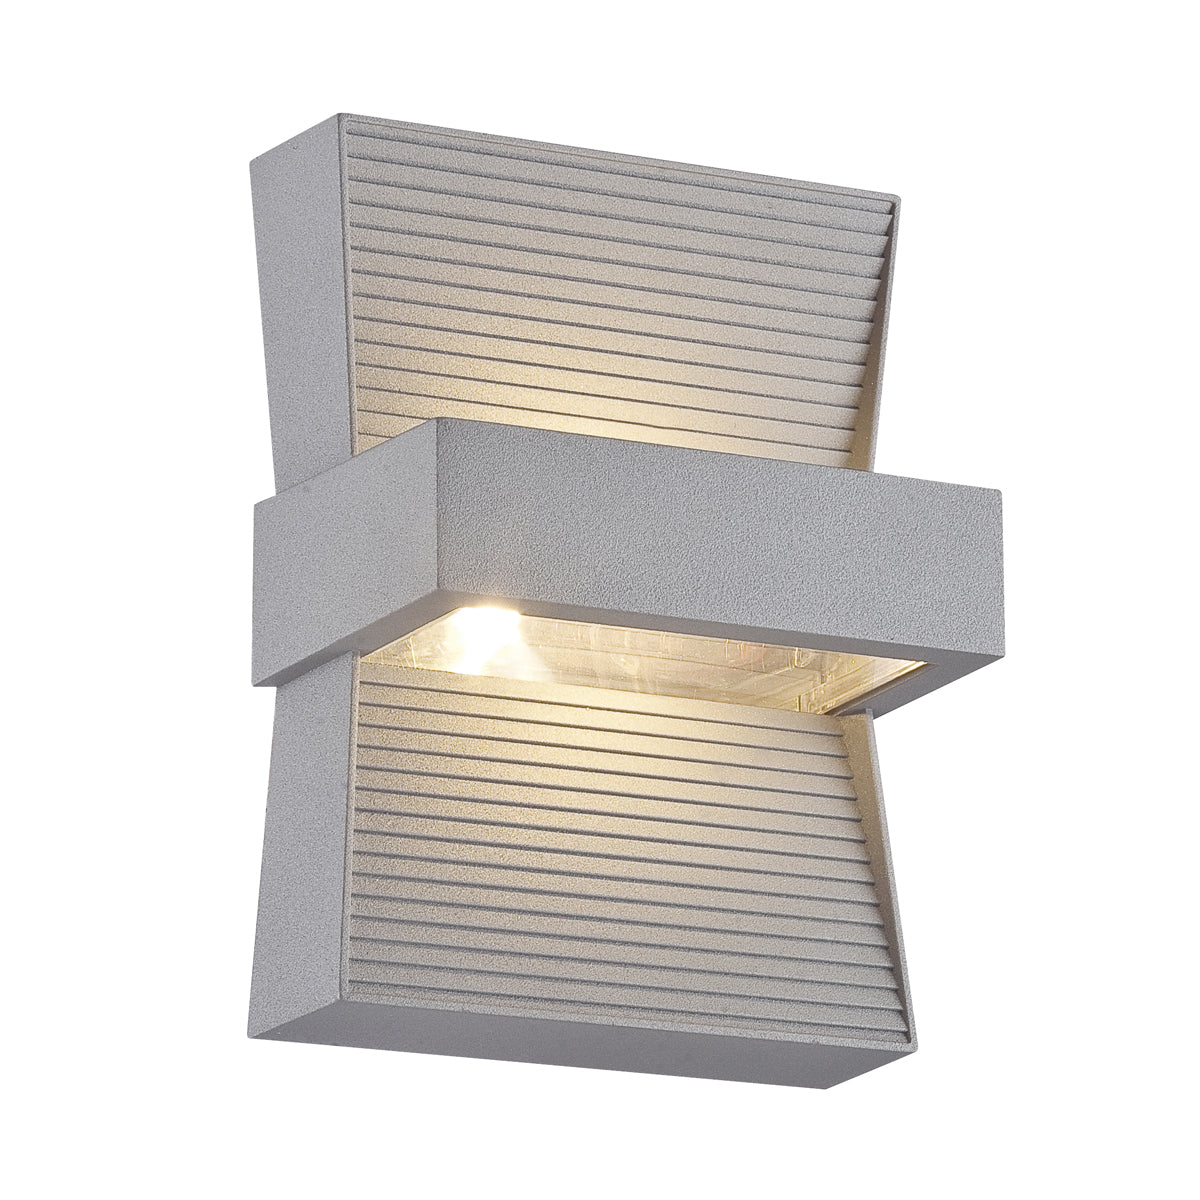 MILL Outdoor sconce Aluminum - 28279-013 INTEGRATED LED | EUROFASE